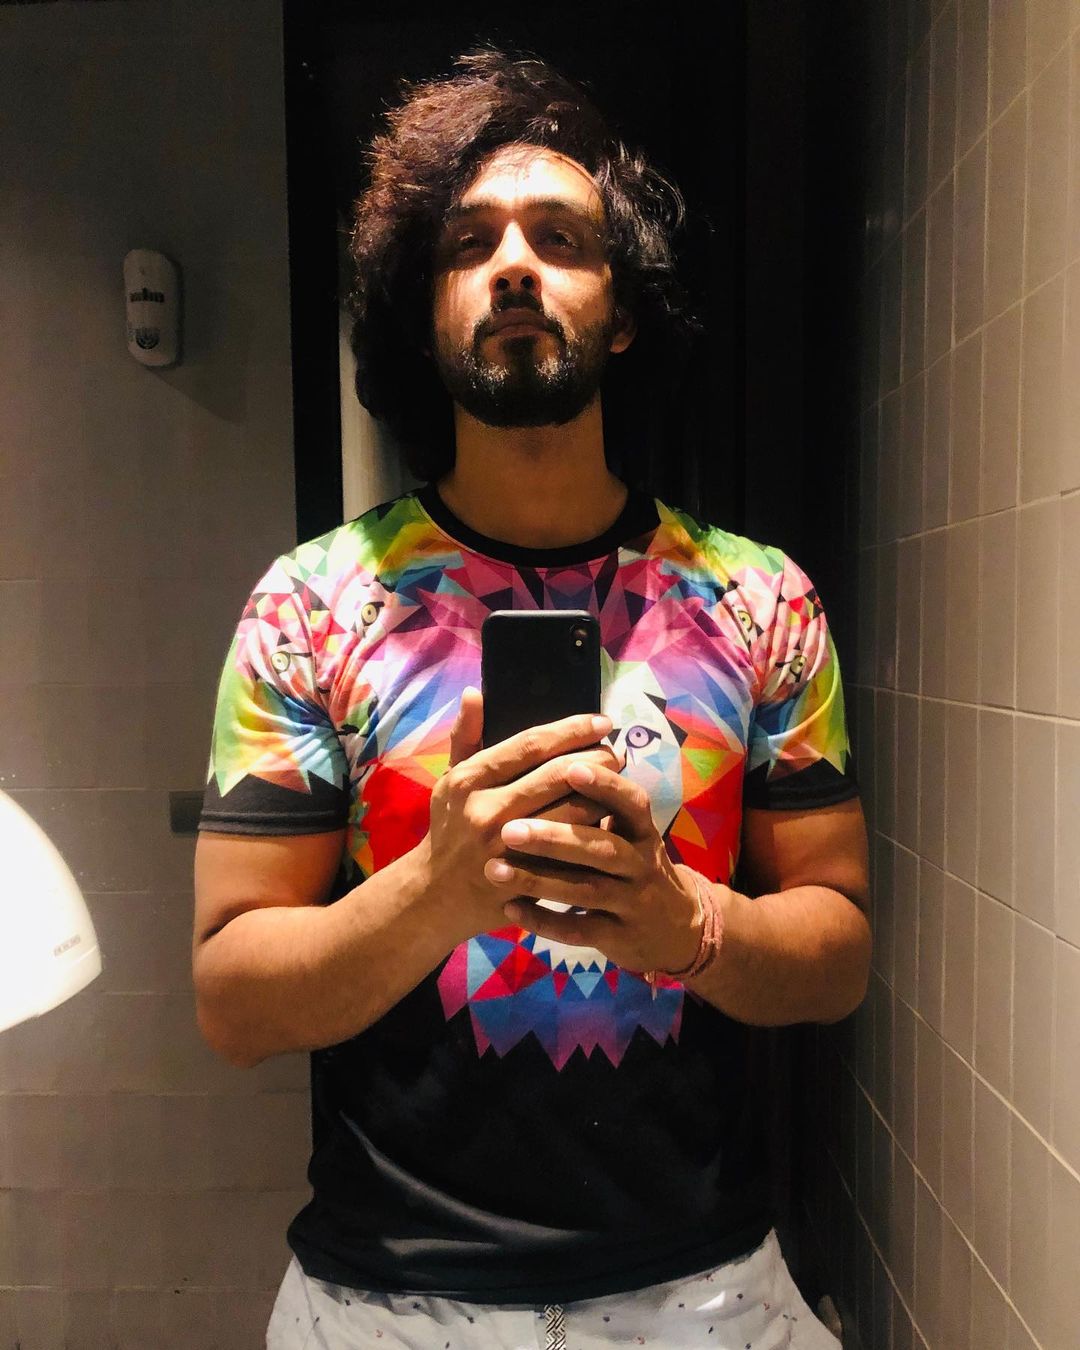 Sourabh Raaj Jain snaps a mirror selfie in October 2019. The room is dark, with mushroom coloured tiles, and is lit only from directly above and to one side. Sourabh has long dark curly hair and a thick, trimmed beard and moustache, and is wearing a black and multicoloured t-shirt and white patterned trousers. He is looking into the mirror.